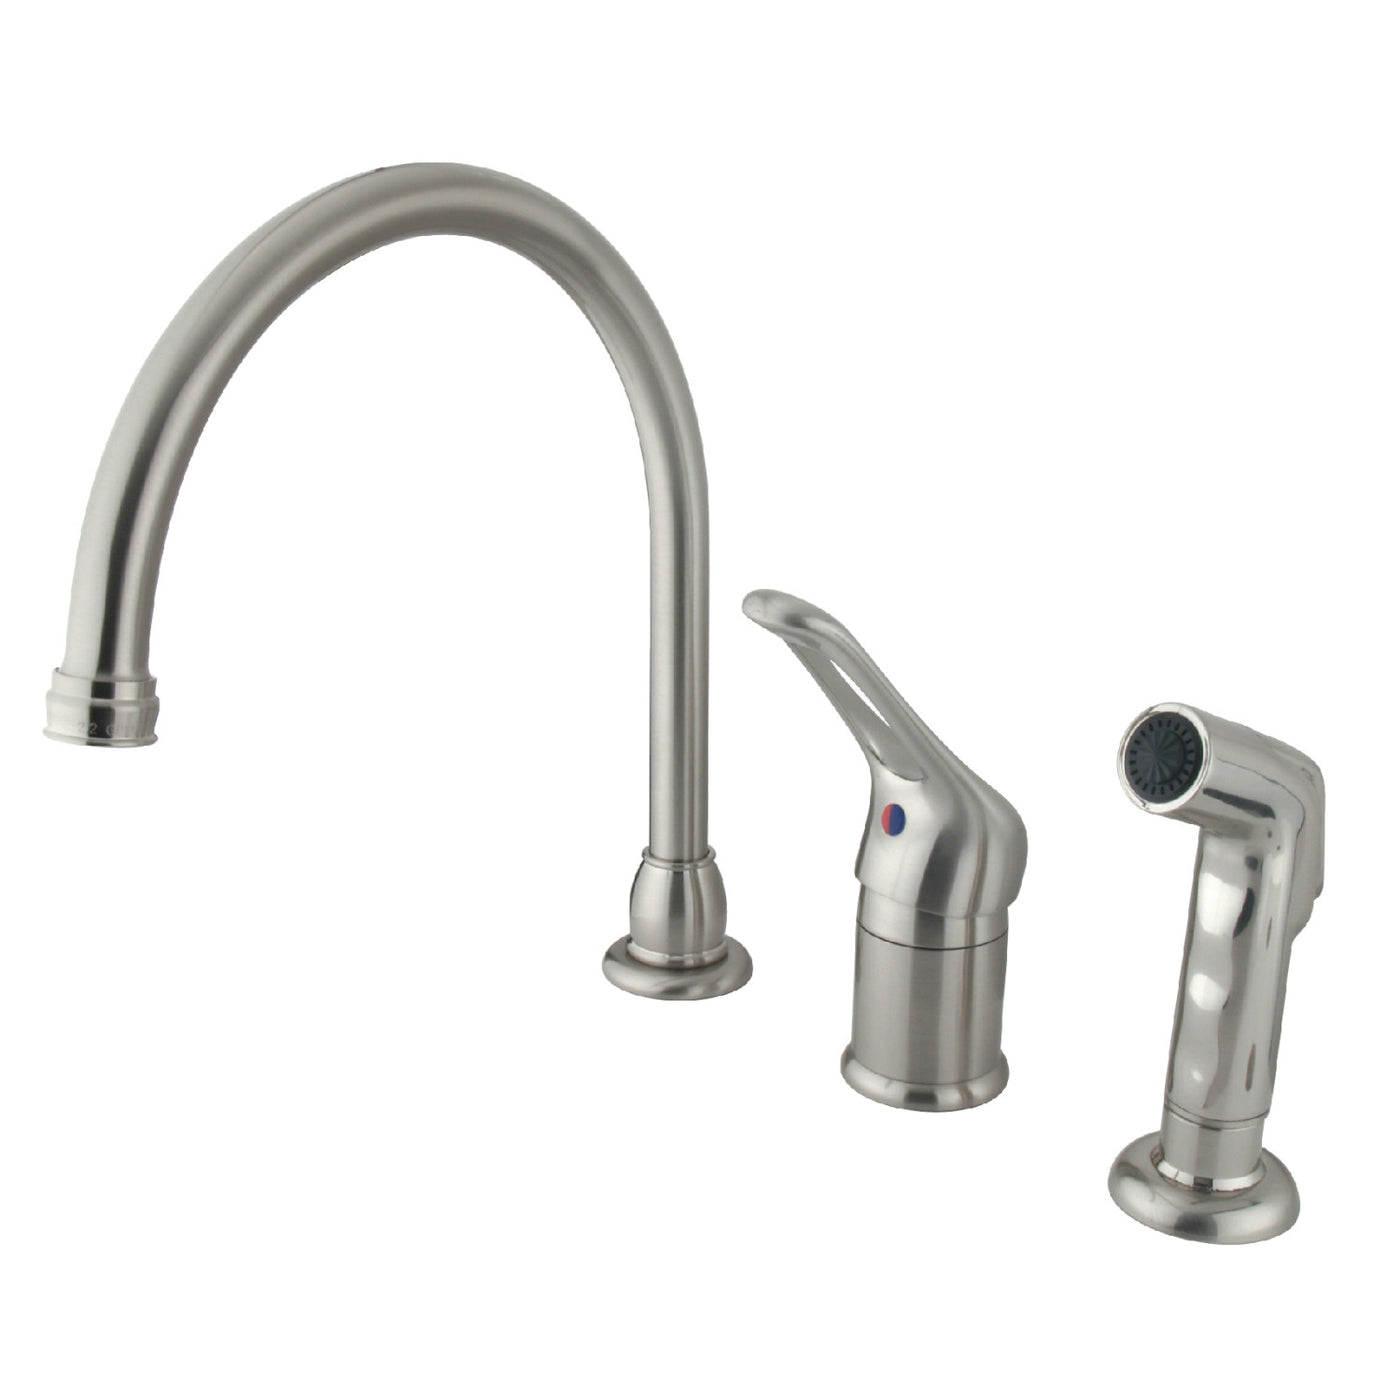 Elements of Design EB818 Single-Handle Widespread Kitchen Faucet Combo, Brushed Nickel